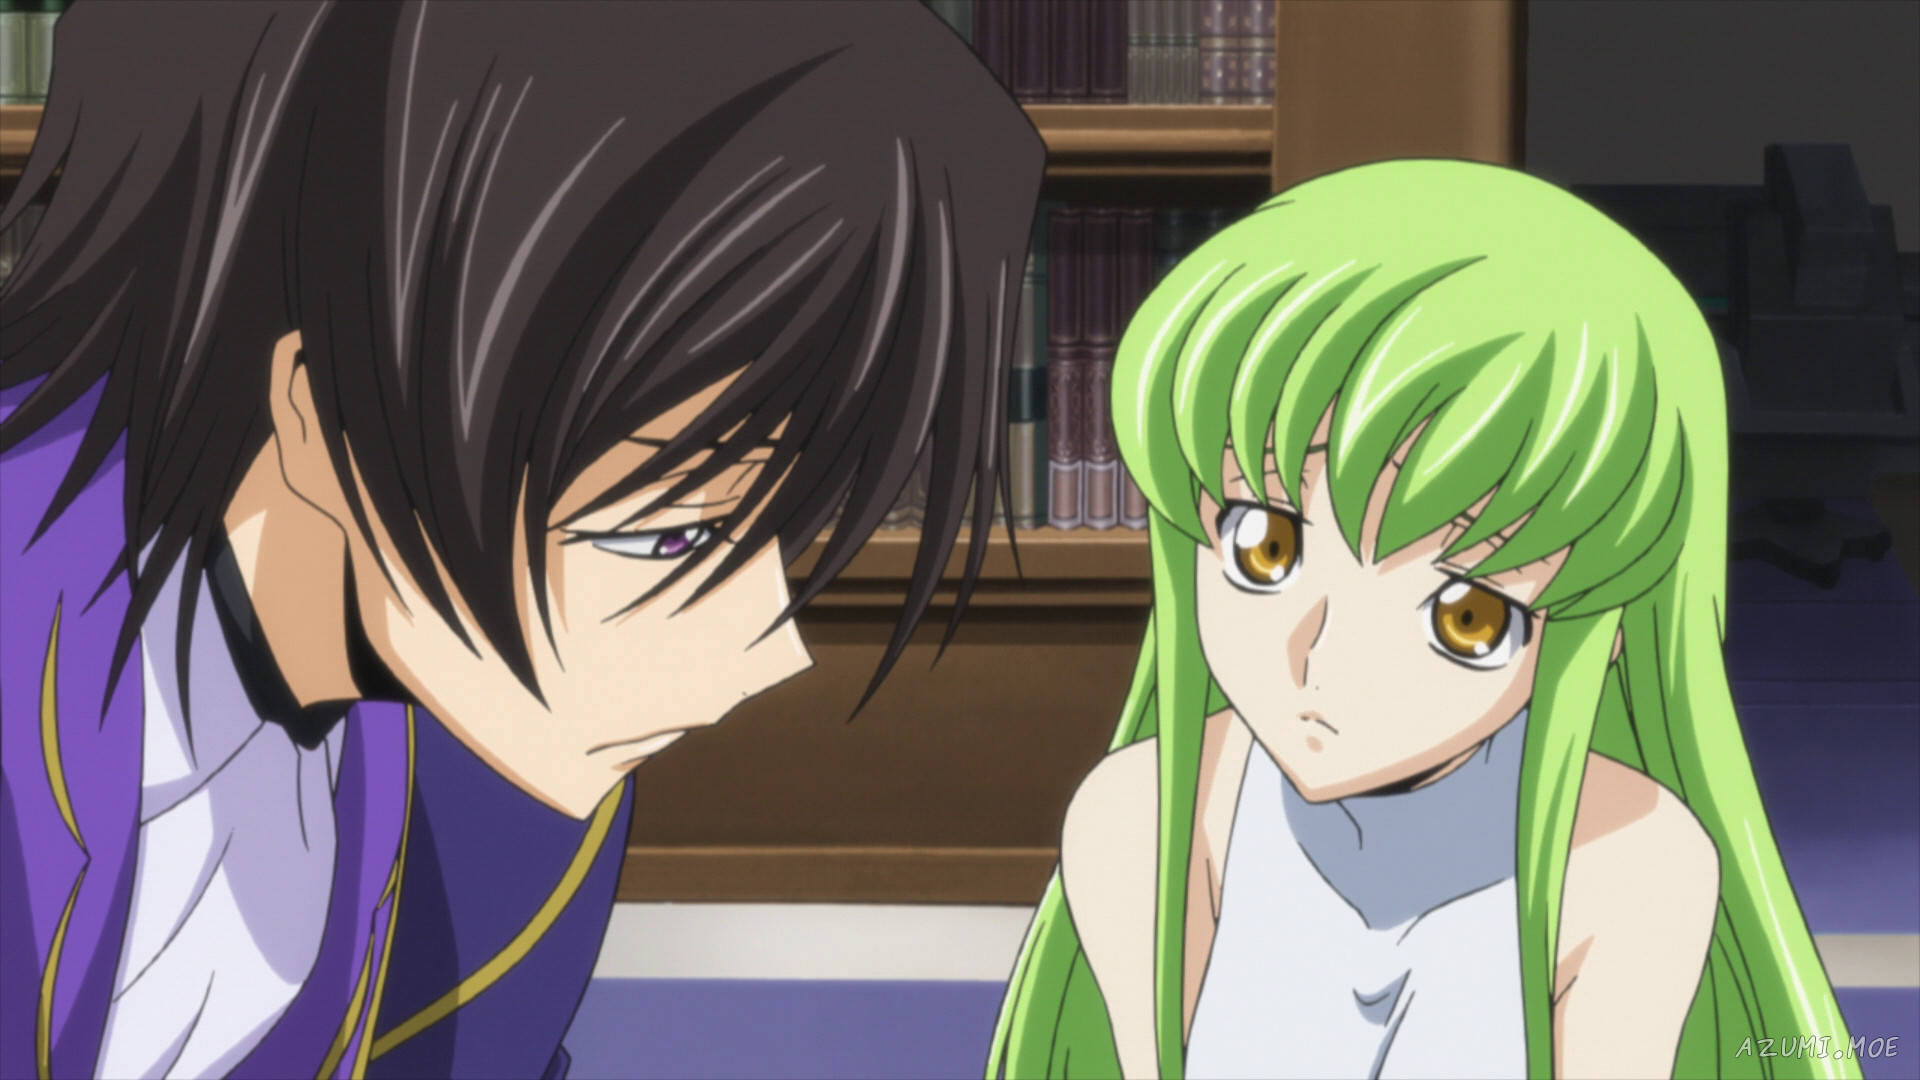 C.c. Staring On Lelouch Lamperouge